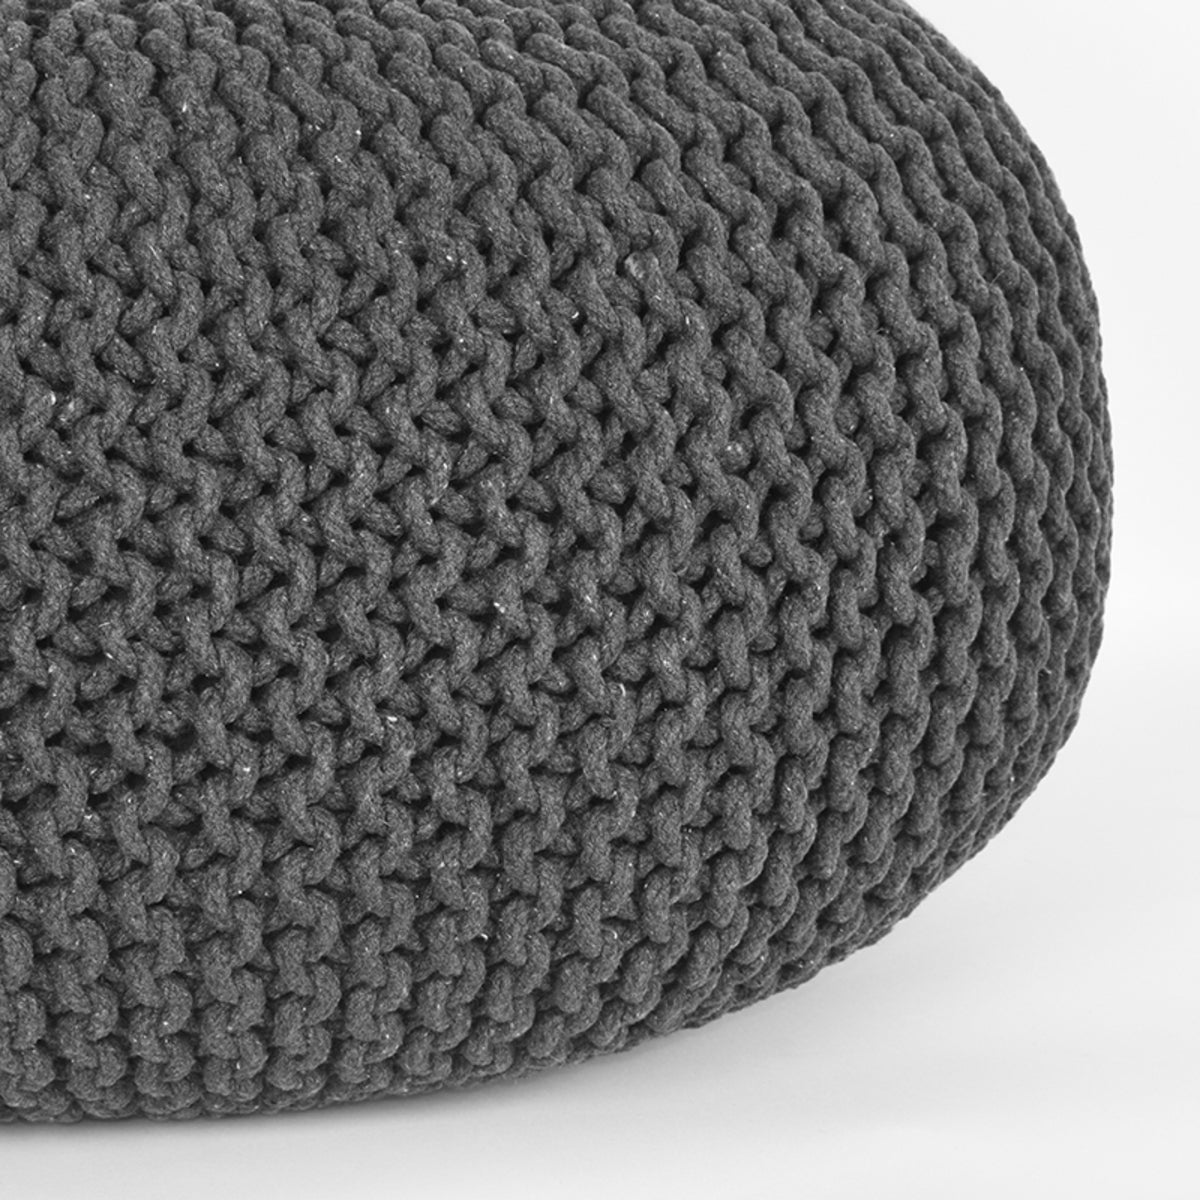 LABEL51 Pouf Knitted - Anthracite - Cotton - L